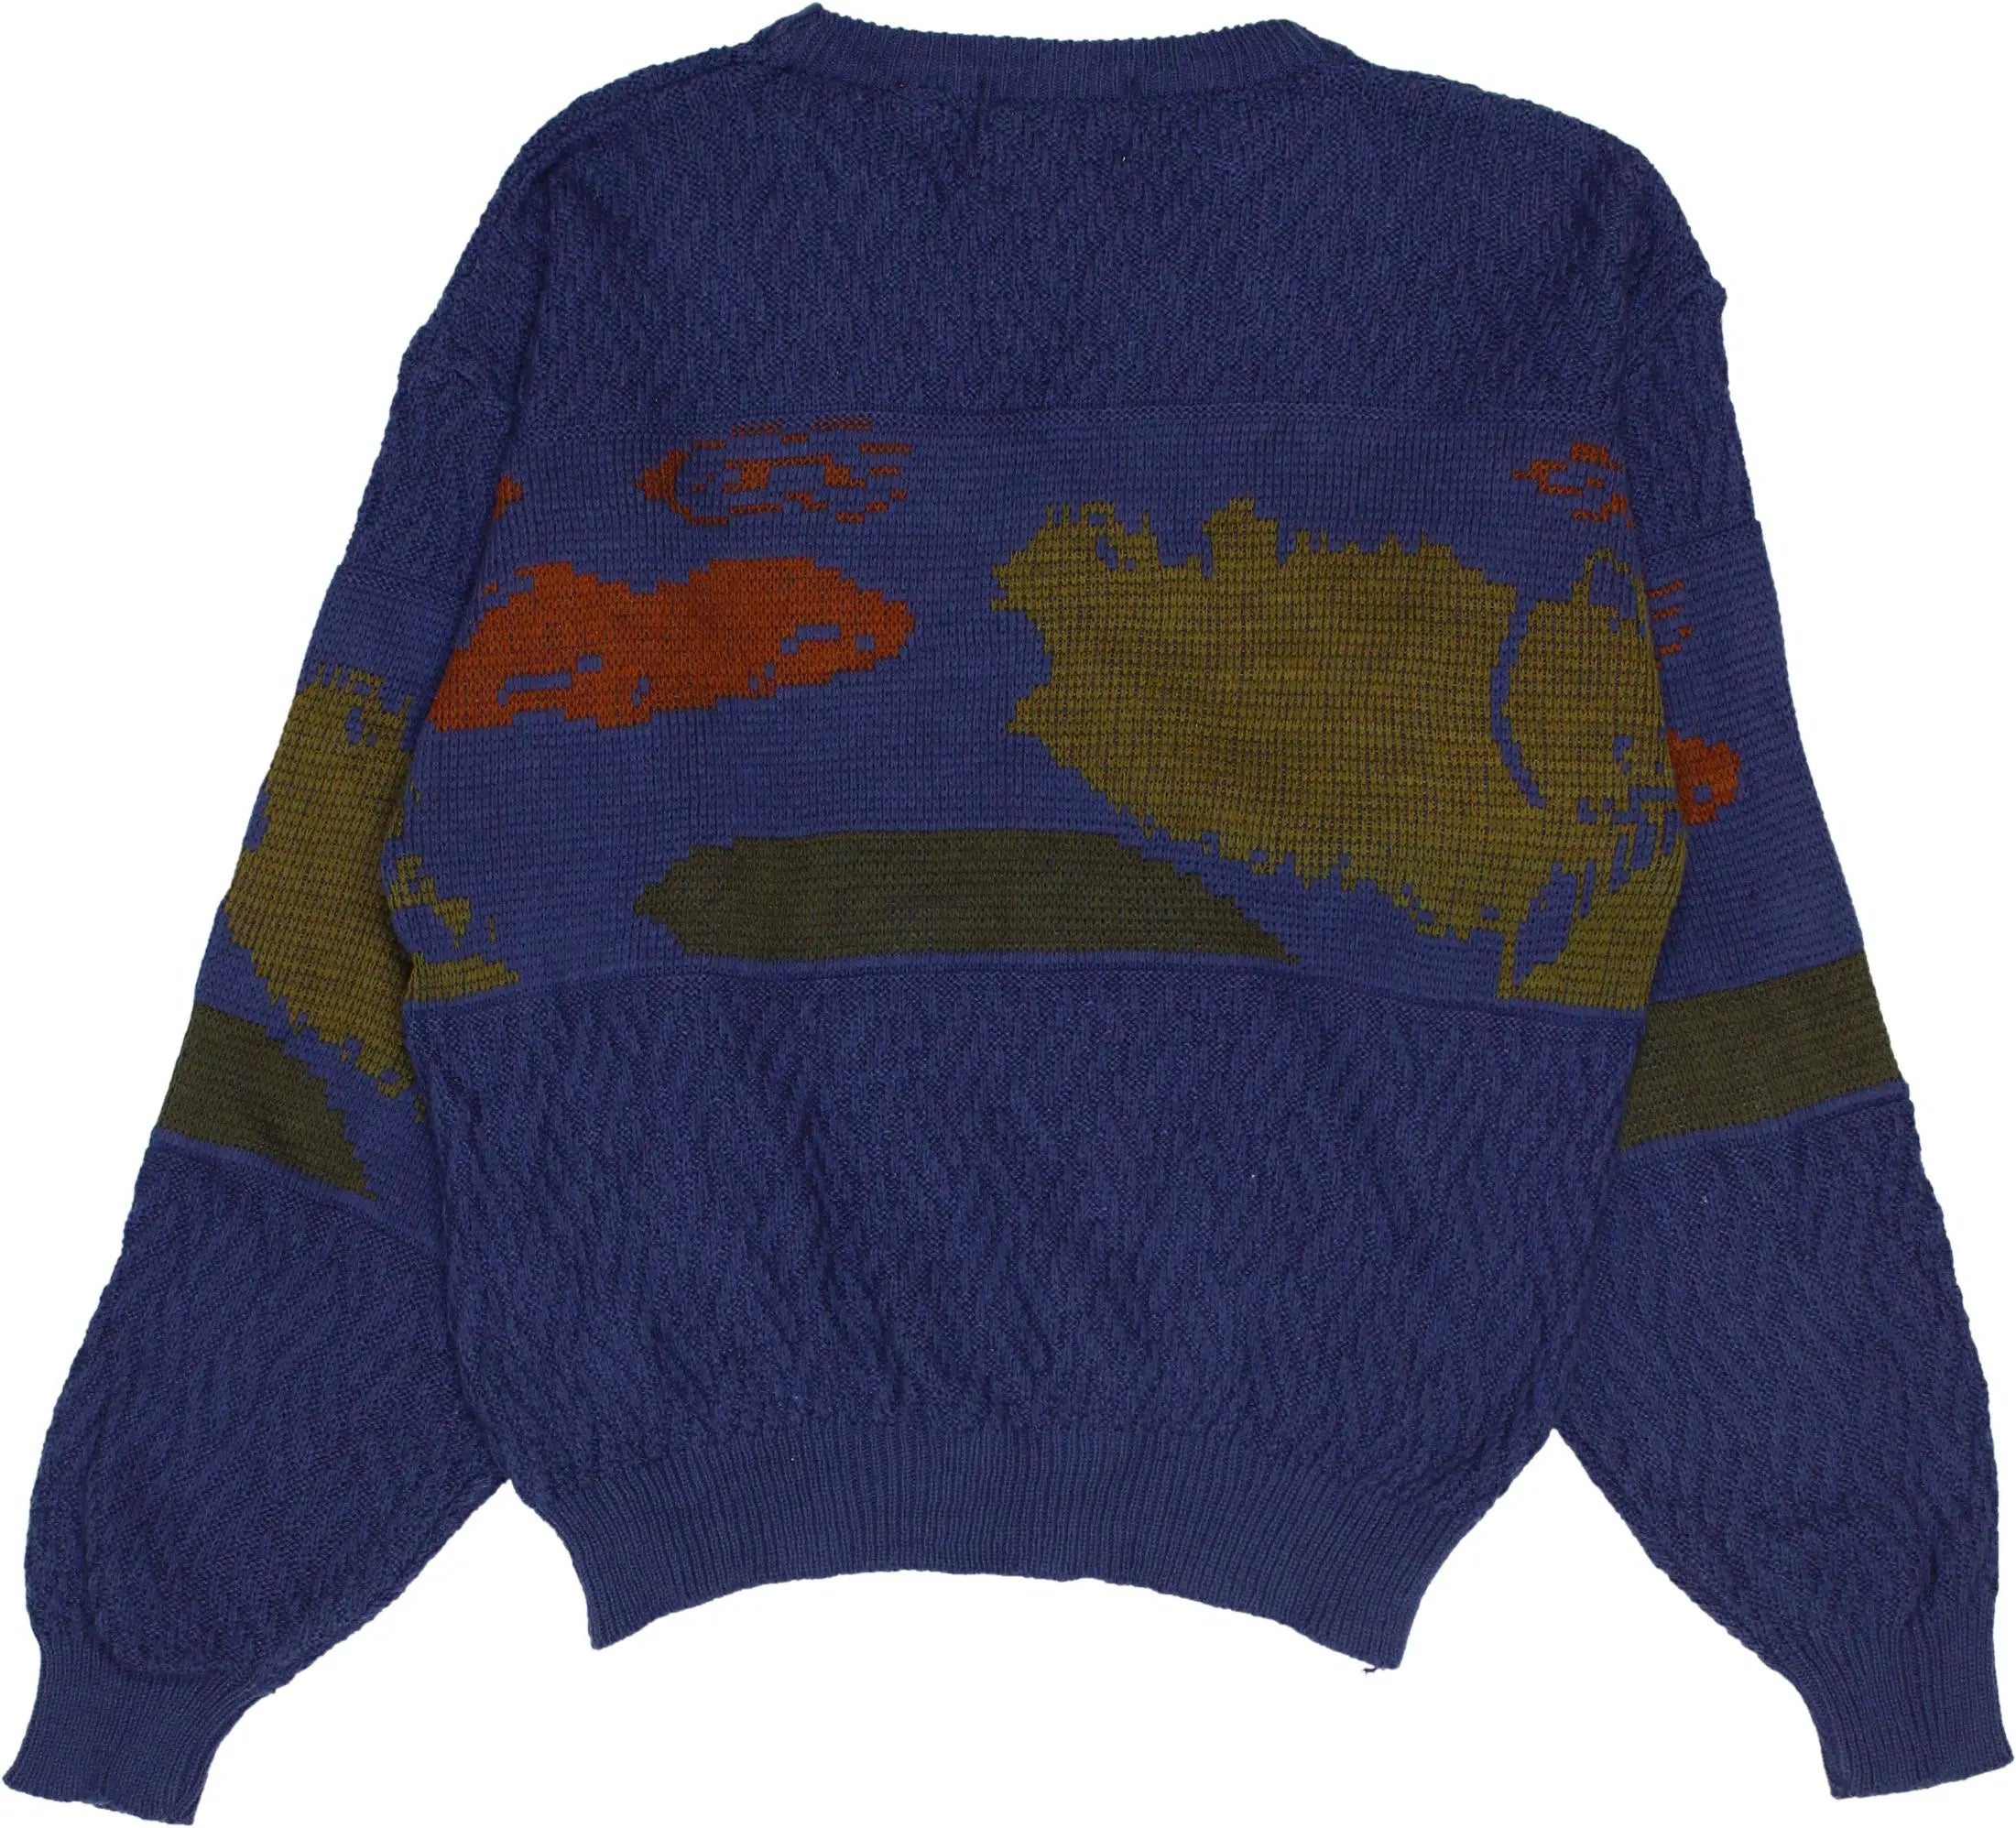 Northwest Territory - Jumper- ThriftTale.com - Vintage and second handclothing